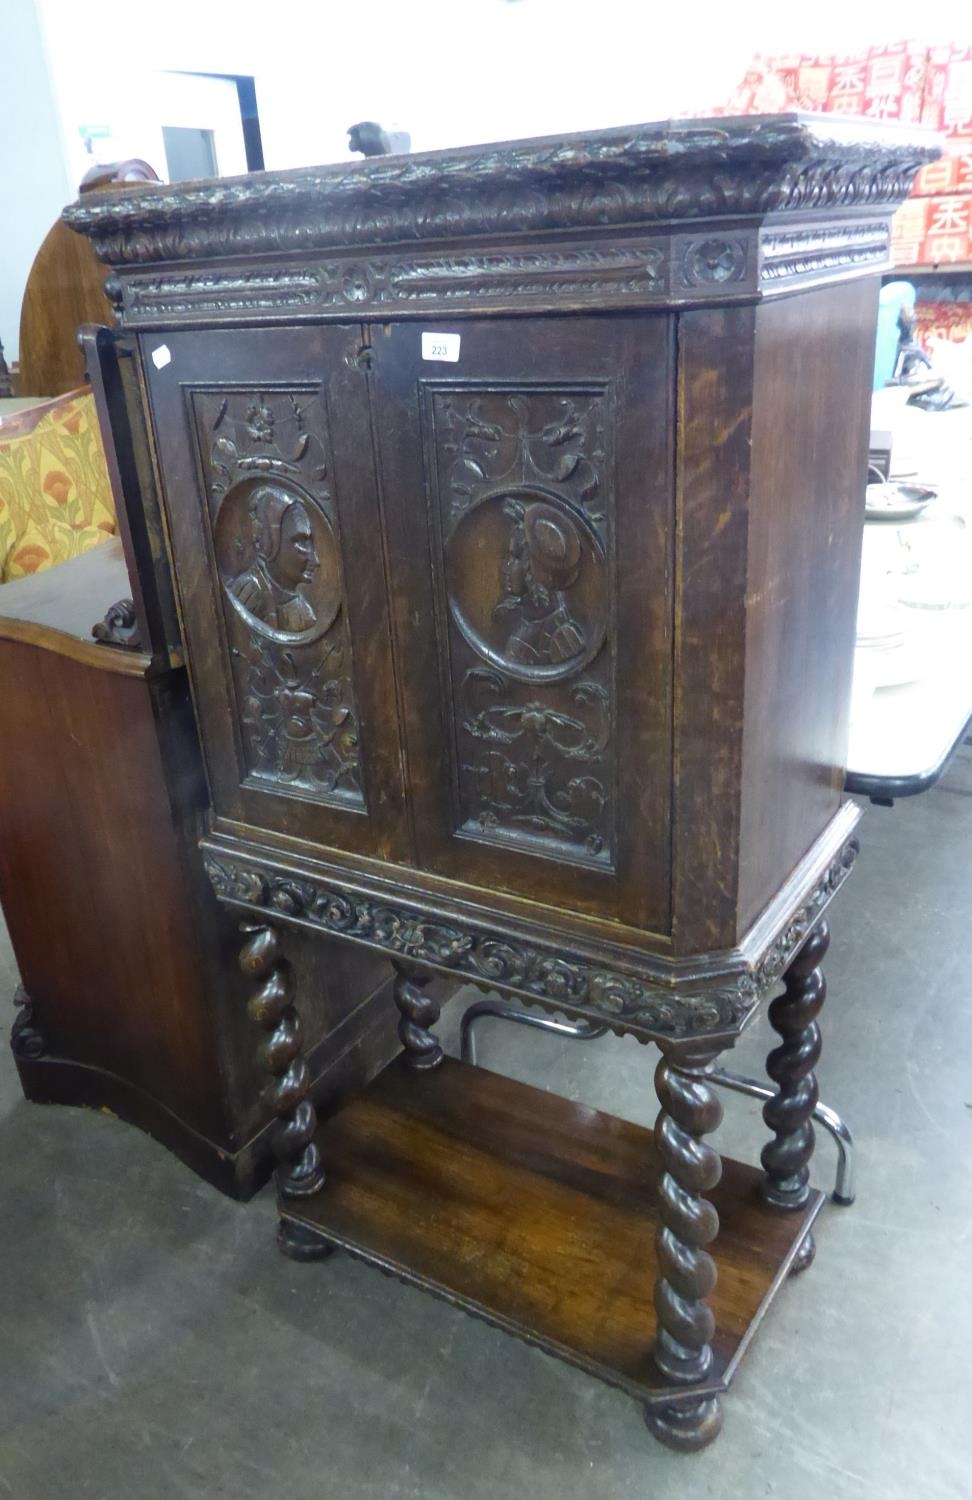 1930’S CABINET ON STAND, WITH EARLIER 18TH CENTURY CARVED PANEL DOORS